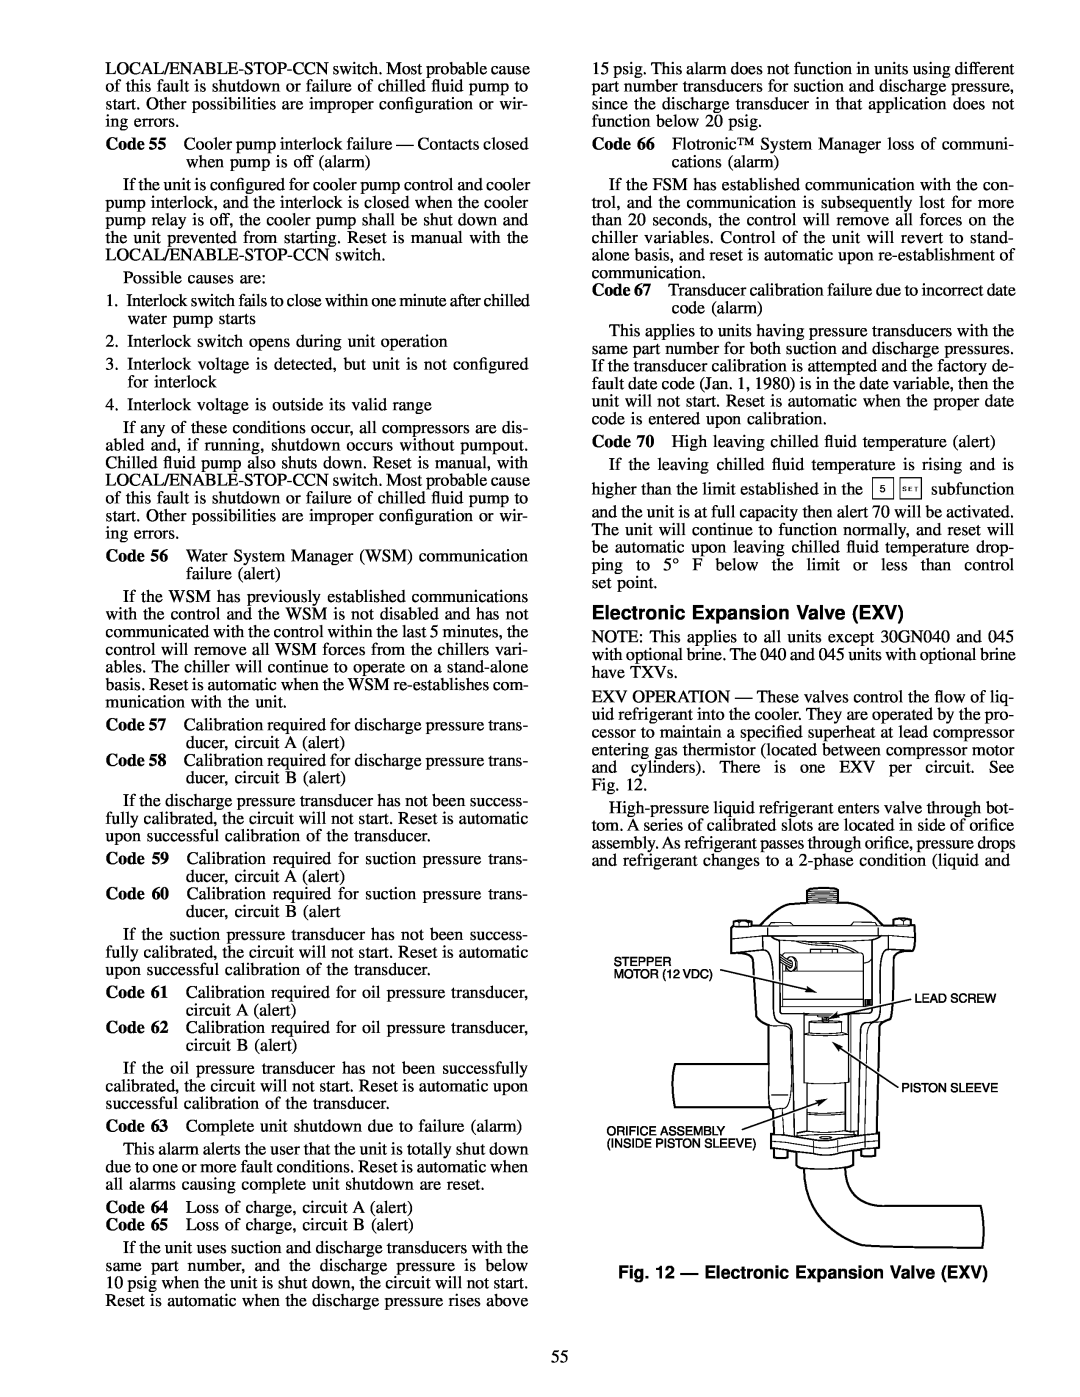 Carrier 30GN040-420 operating instructions Ð Electronic Expansion Valve EXV 